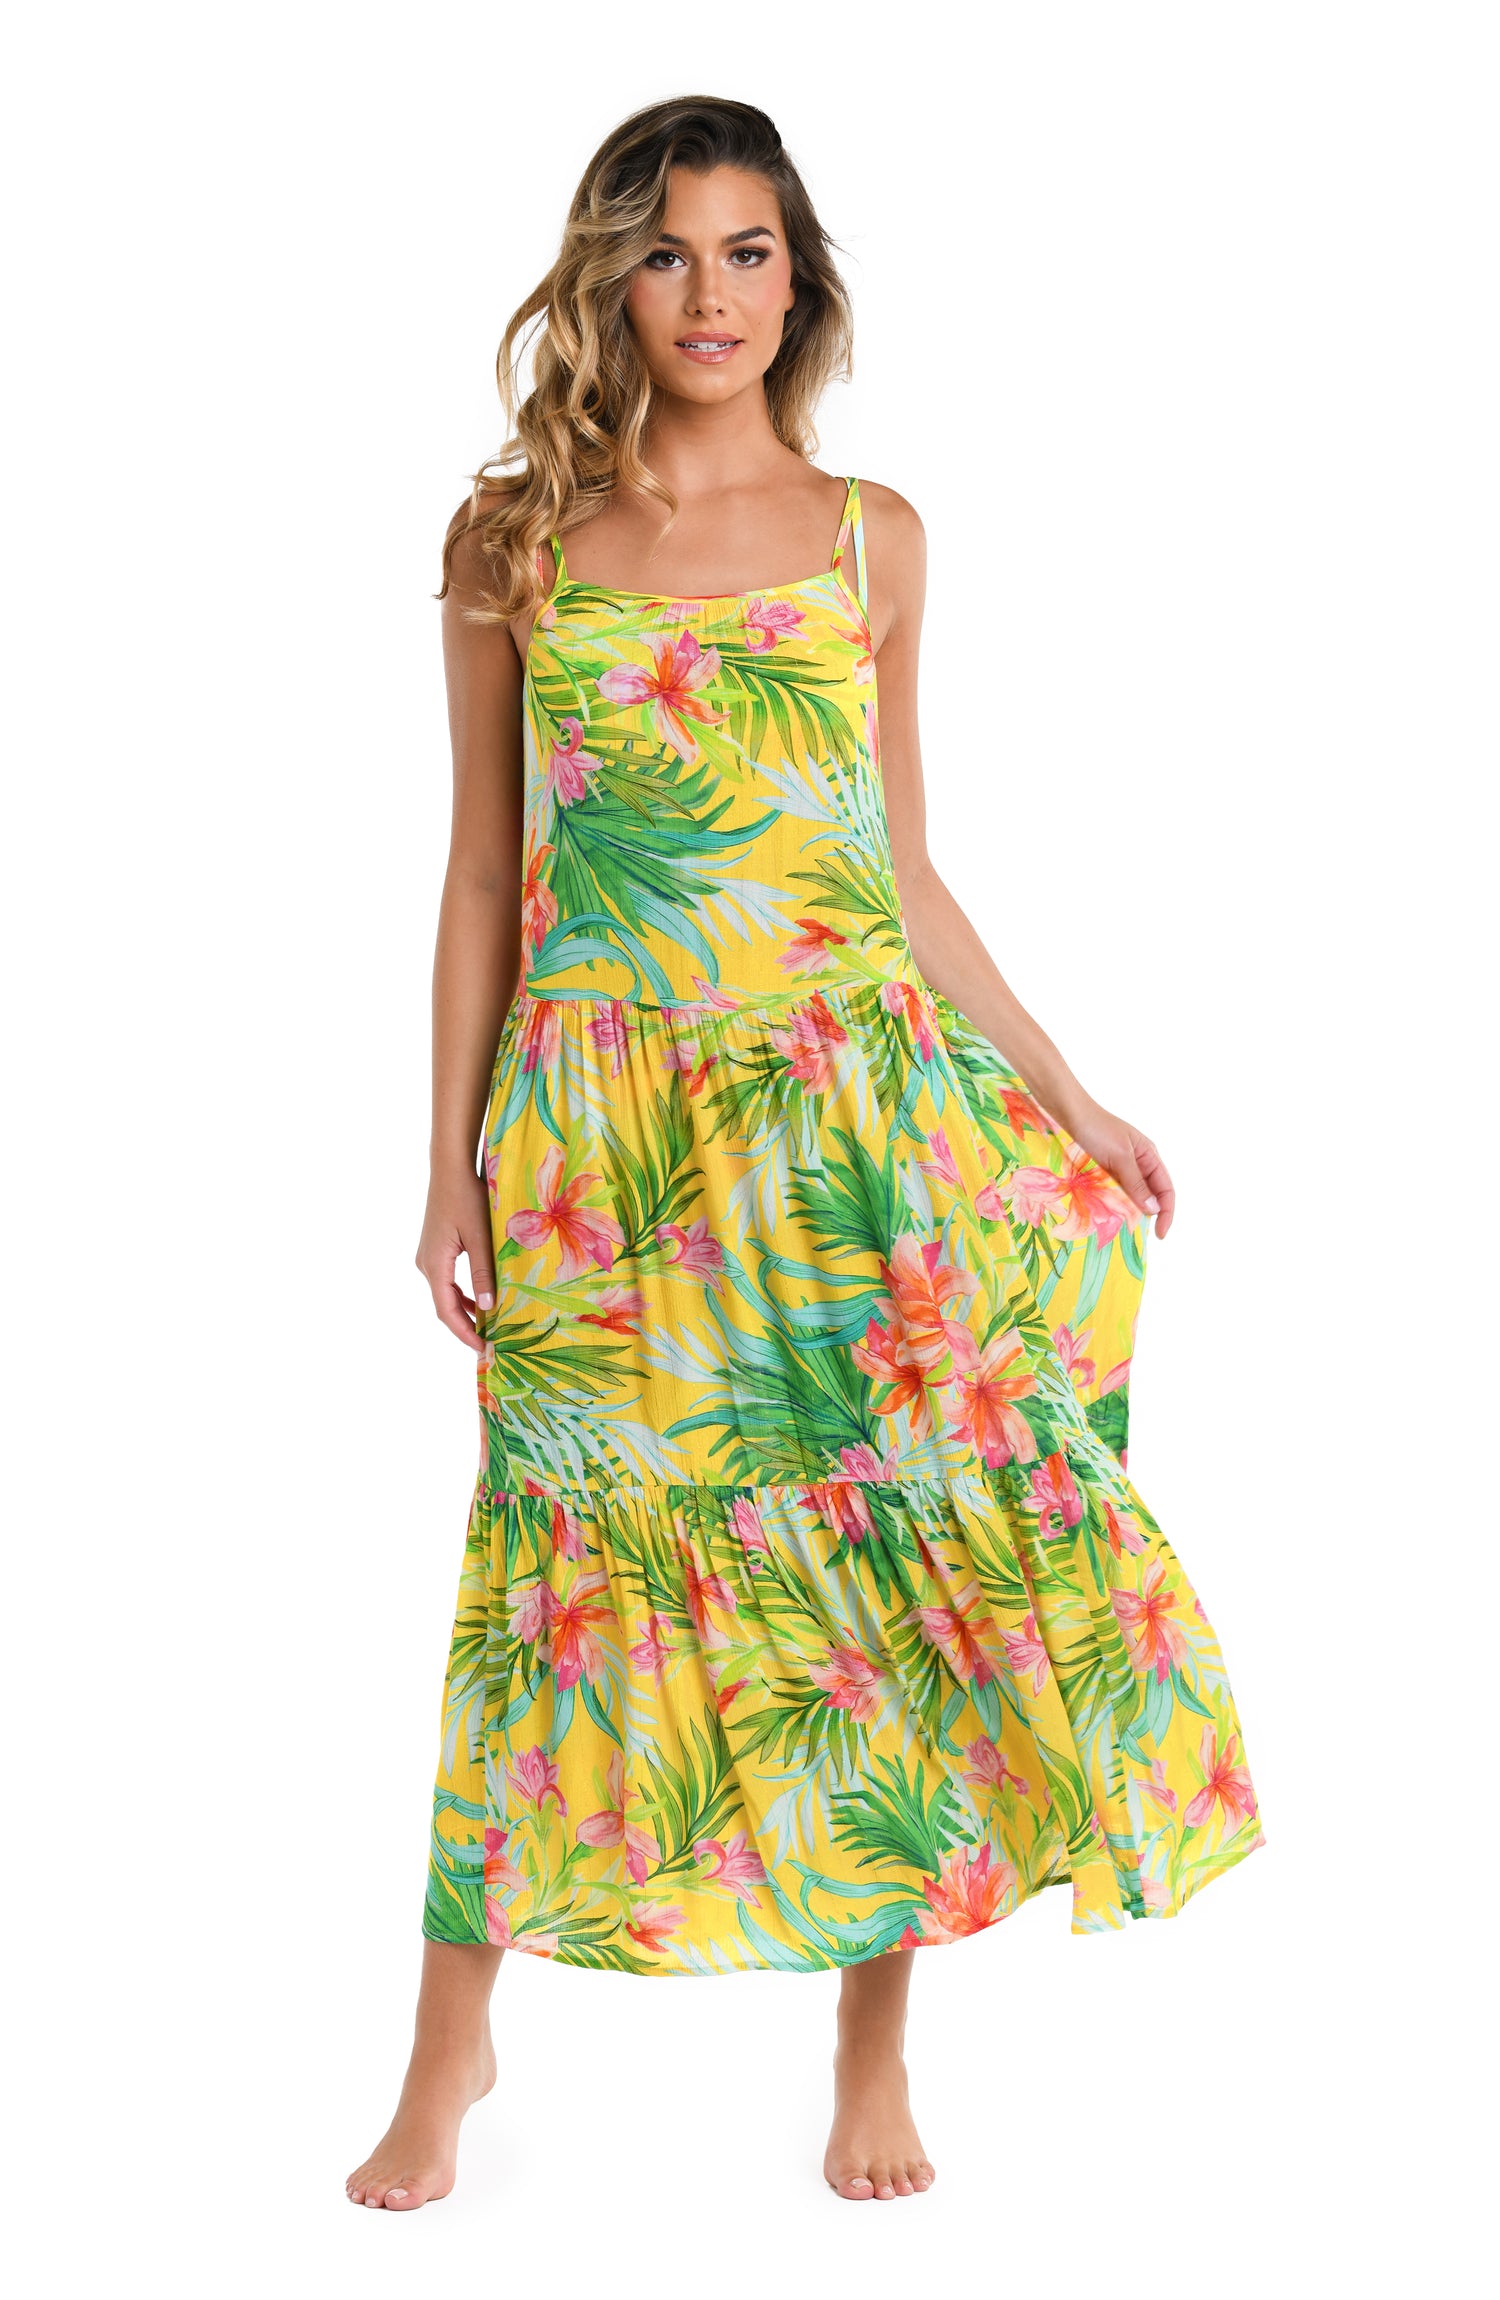 Model is wearing a bright yellow, pink, and green multicolored tropical printed Tiered Midi Dress